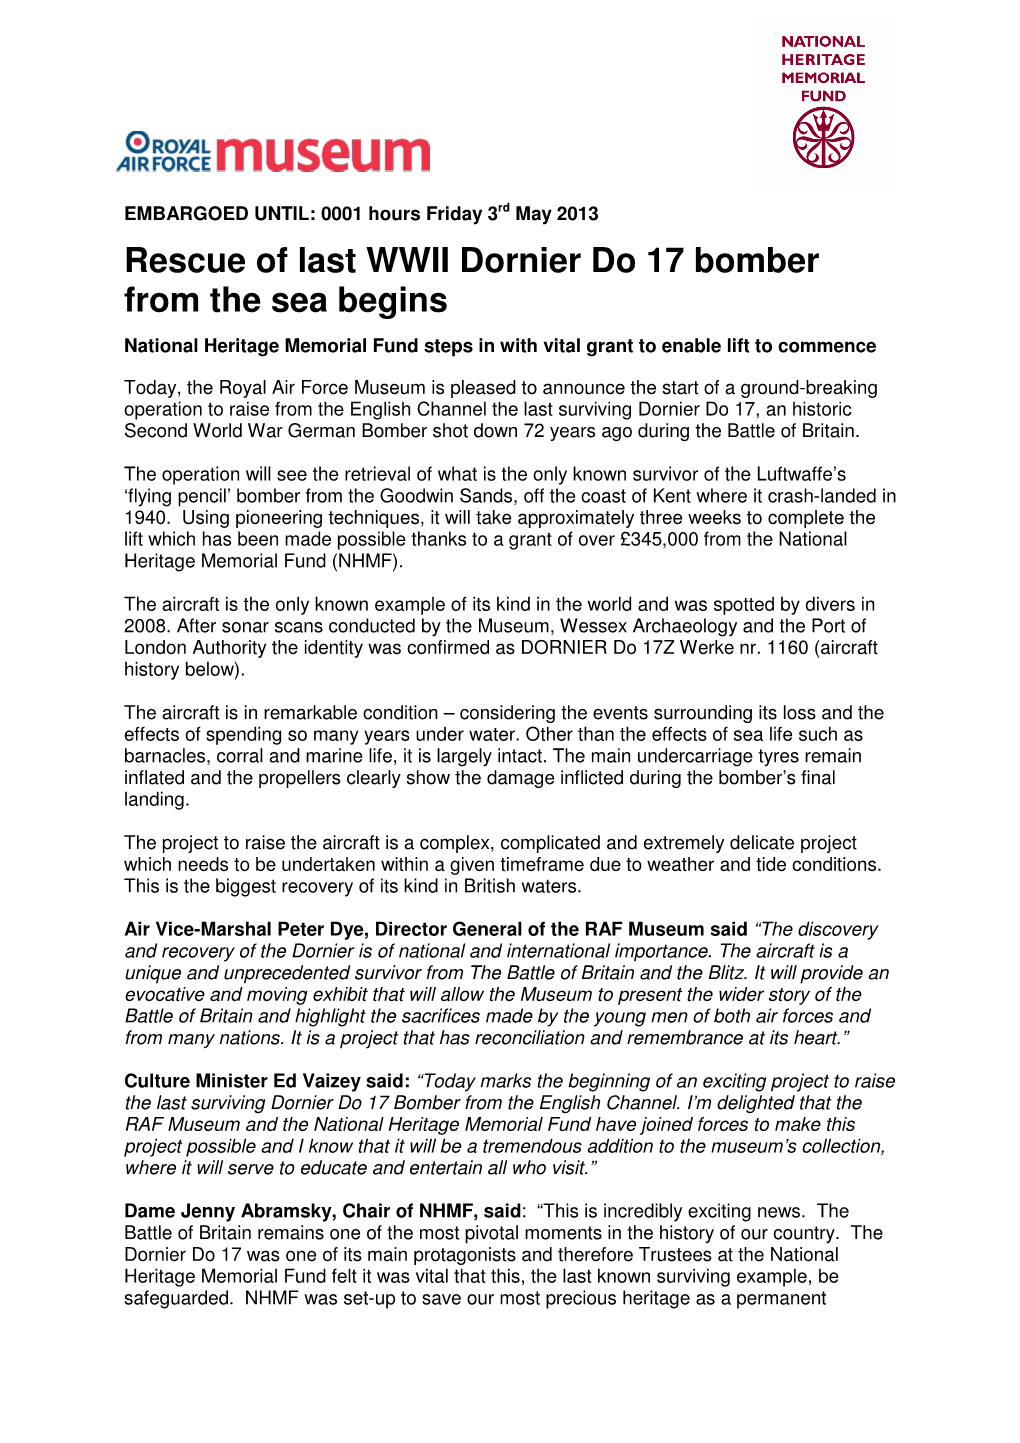 Rescue of Last WWII Dornier Do 17 Bomber from the Sea Begins